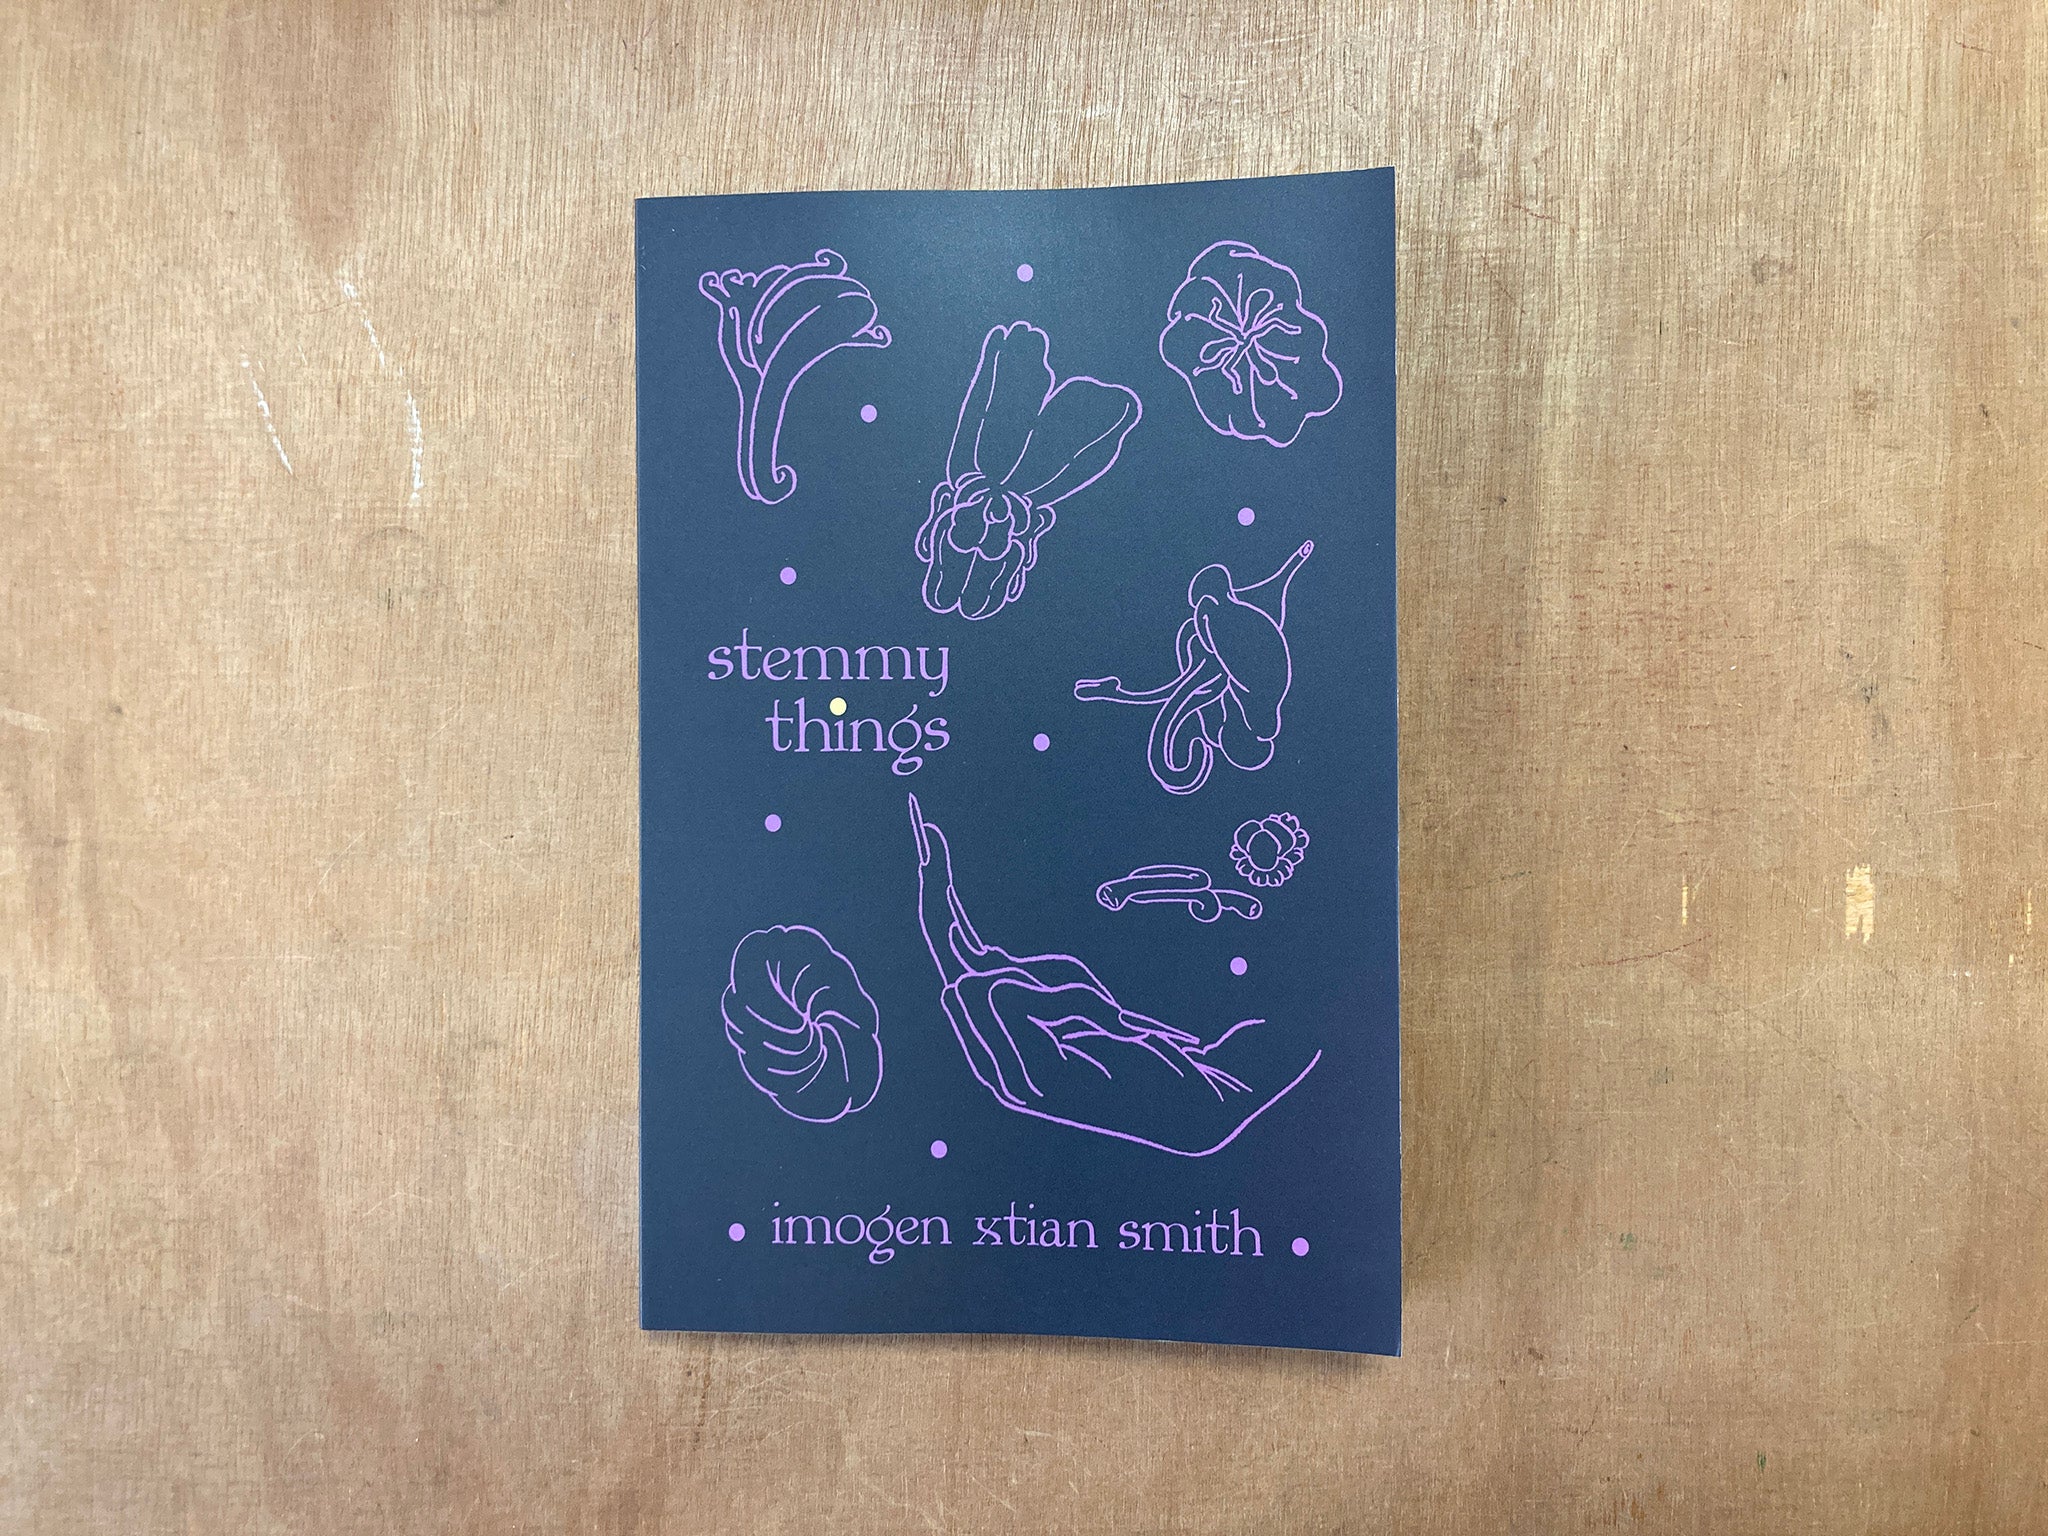 STEMMY THINGS by imogen xtian smith